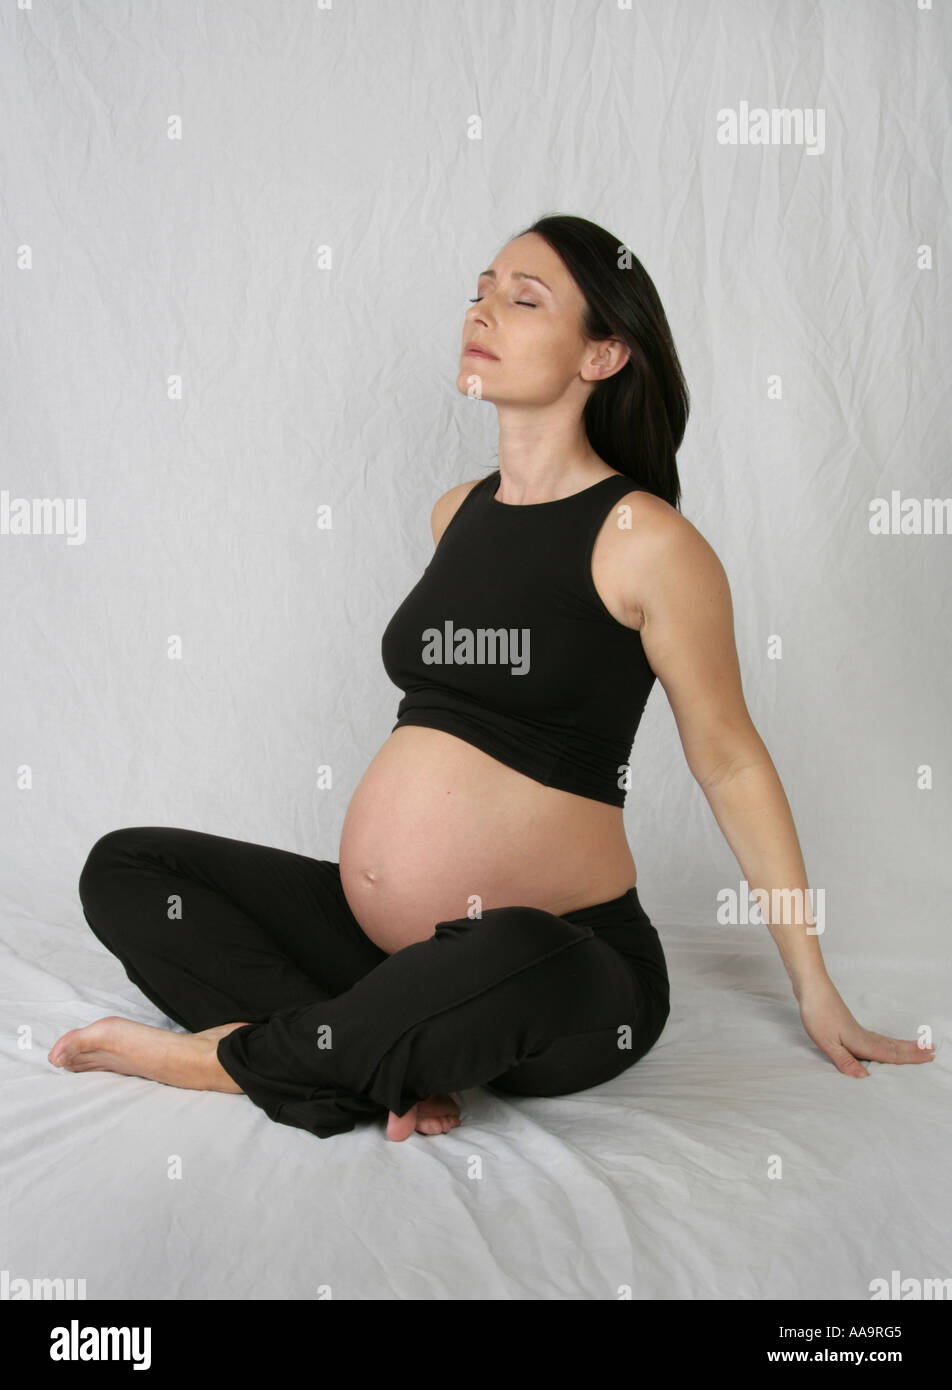 Pregnant Woman Sitting Crossed Legged Wearing a Black Vest and Trousers Stock Photo